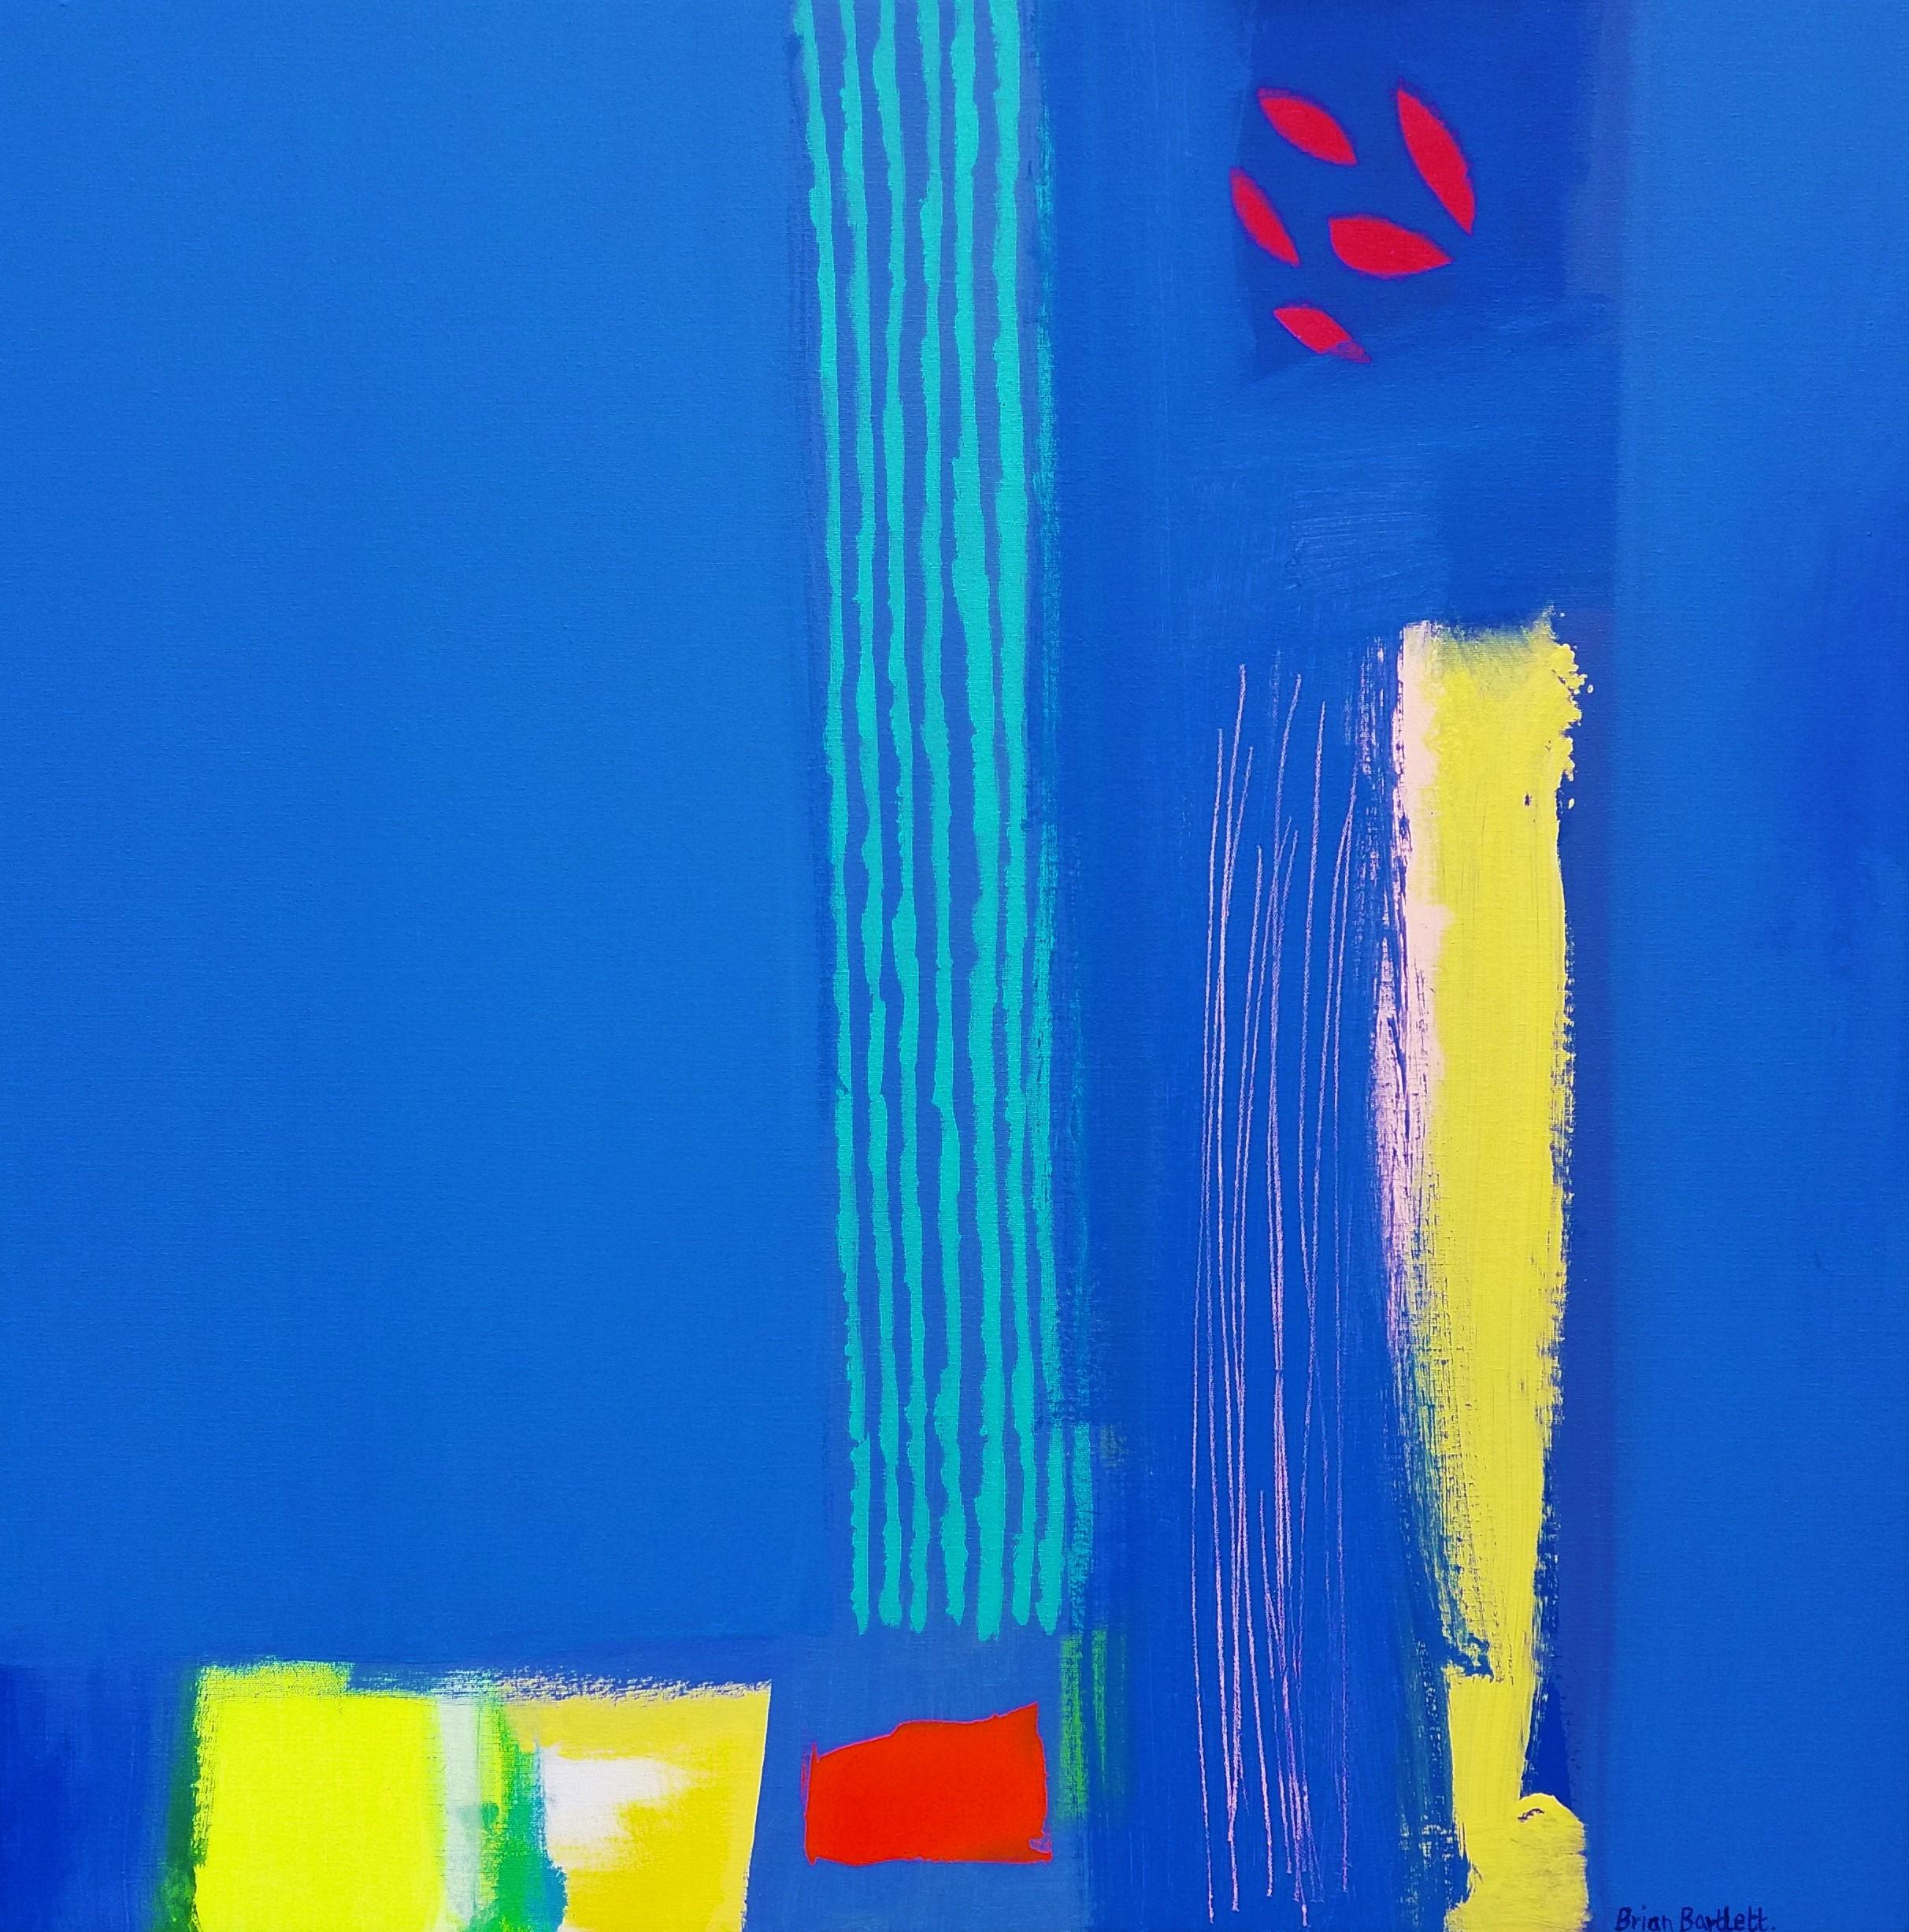 Cote d'Azur - contemporary vibrant bright blue abstract acrylic painting - Painting by Brian Bartlett